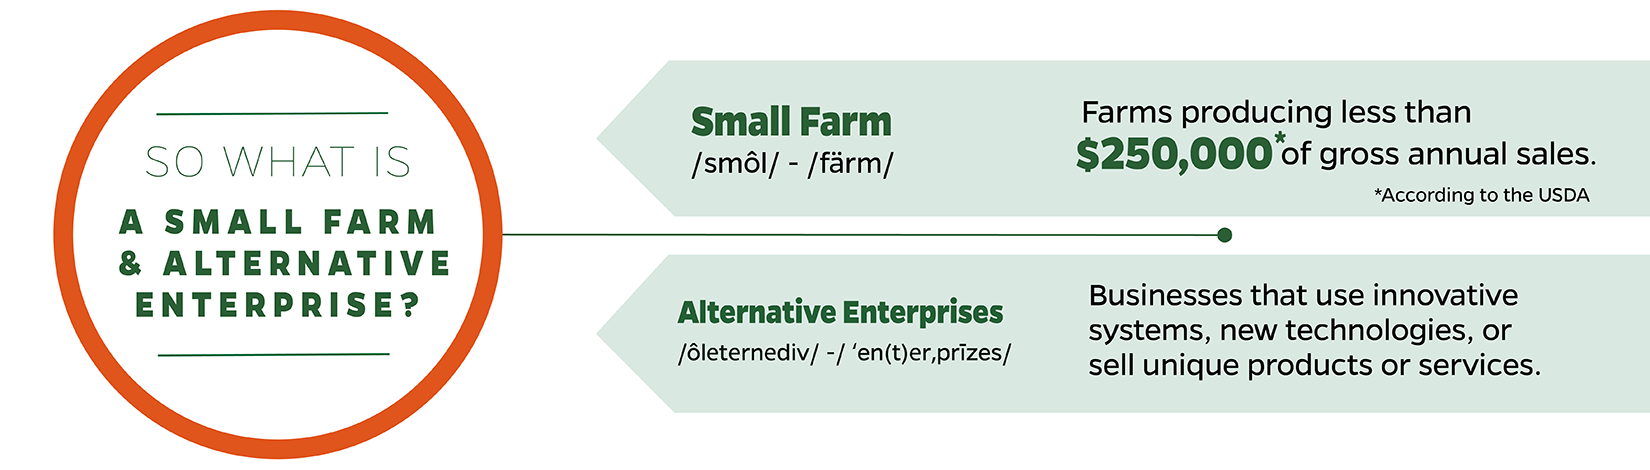 So what is a small farm and alternative enterprise? Small farm - a farm producing less than $250,000 in annual sales. Alternative Enterprise - business that uses innovative systems, new technology, or sells a unique product or service.